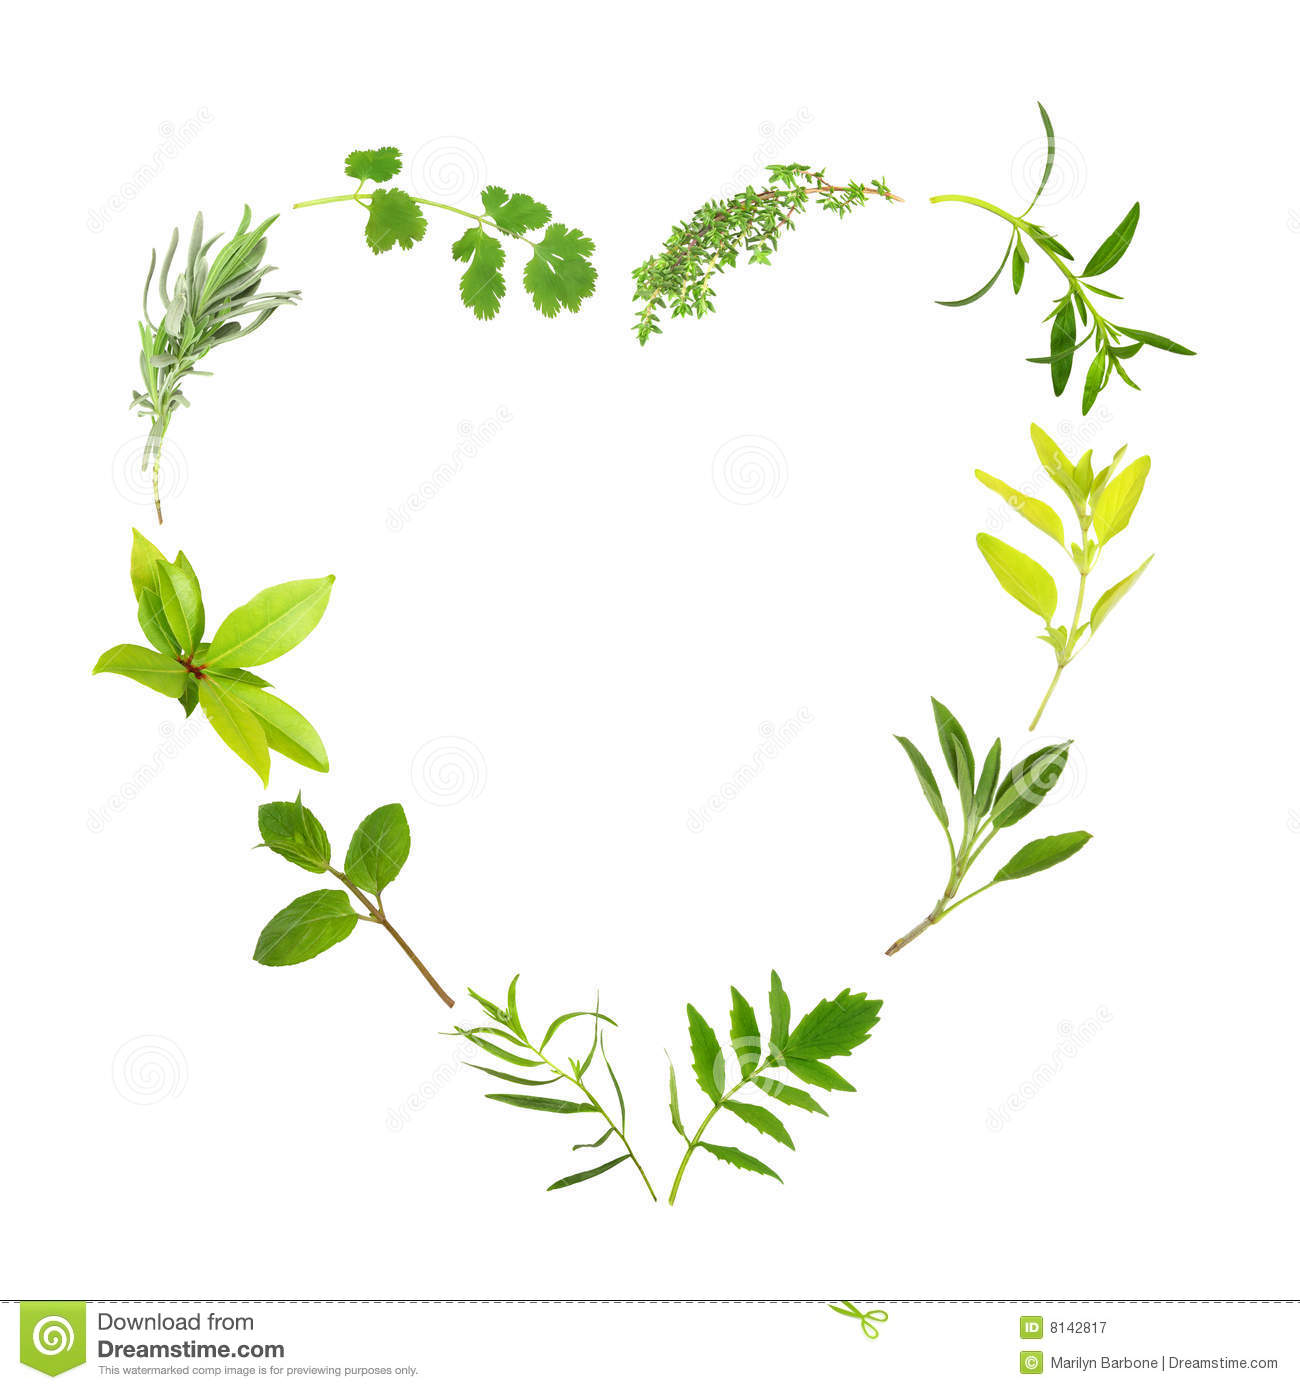 Herb Leaf Selection Forming A Heart Shape Over White Background